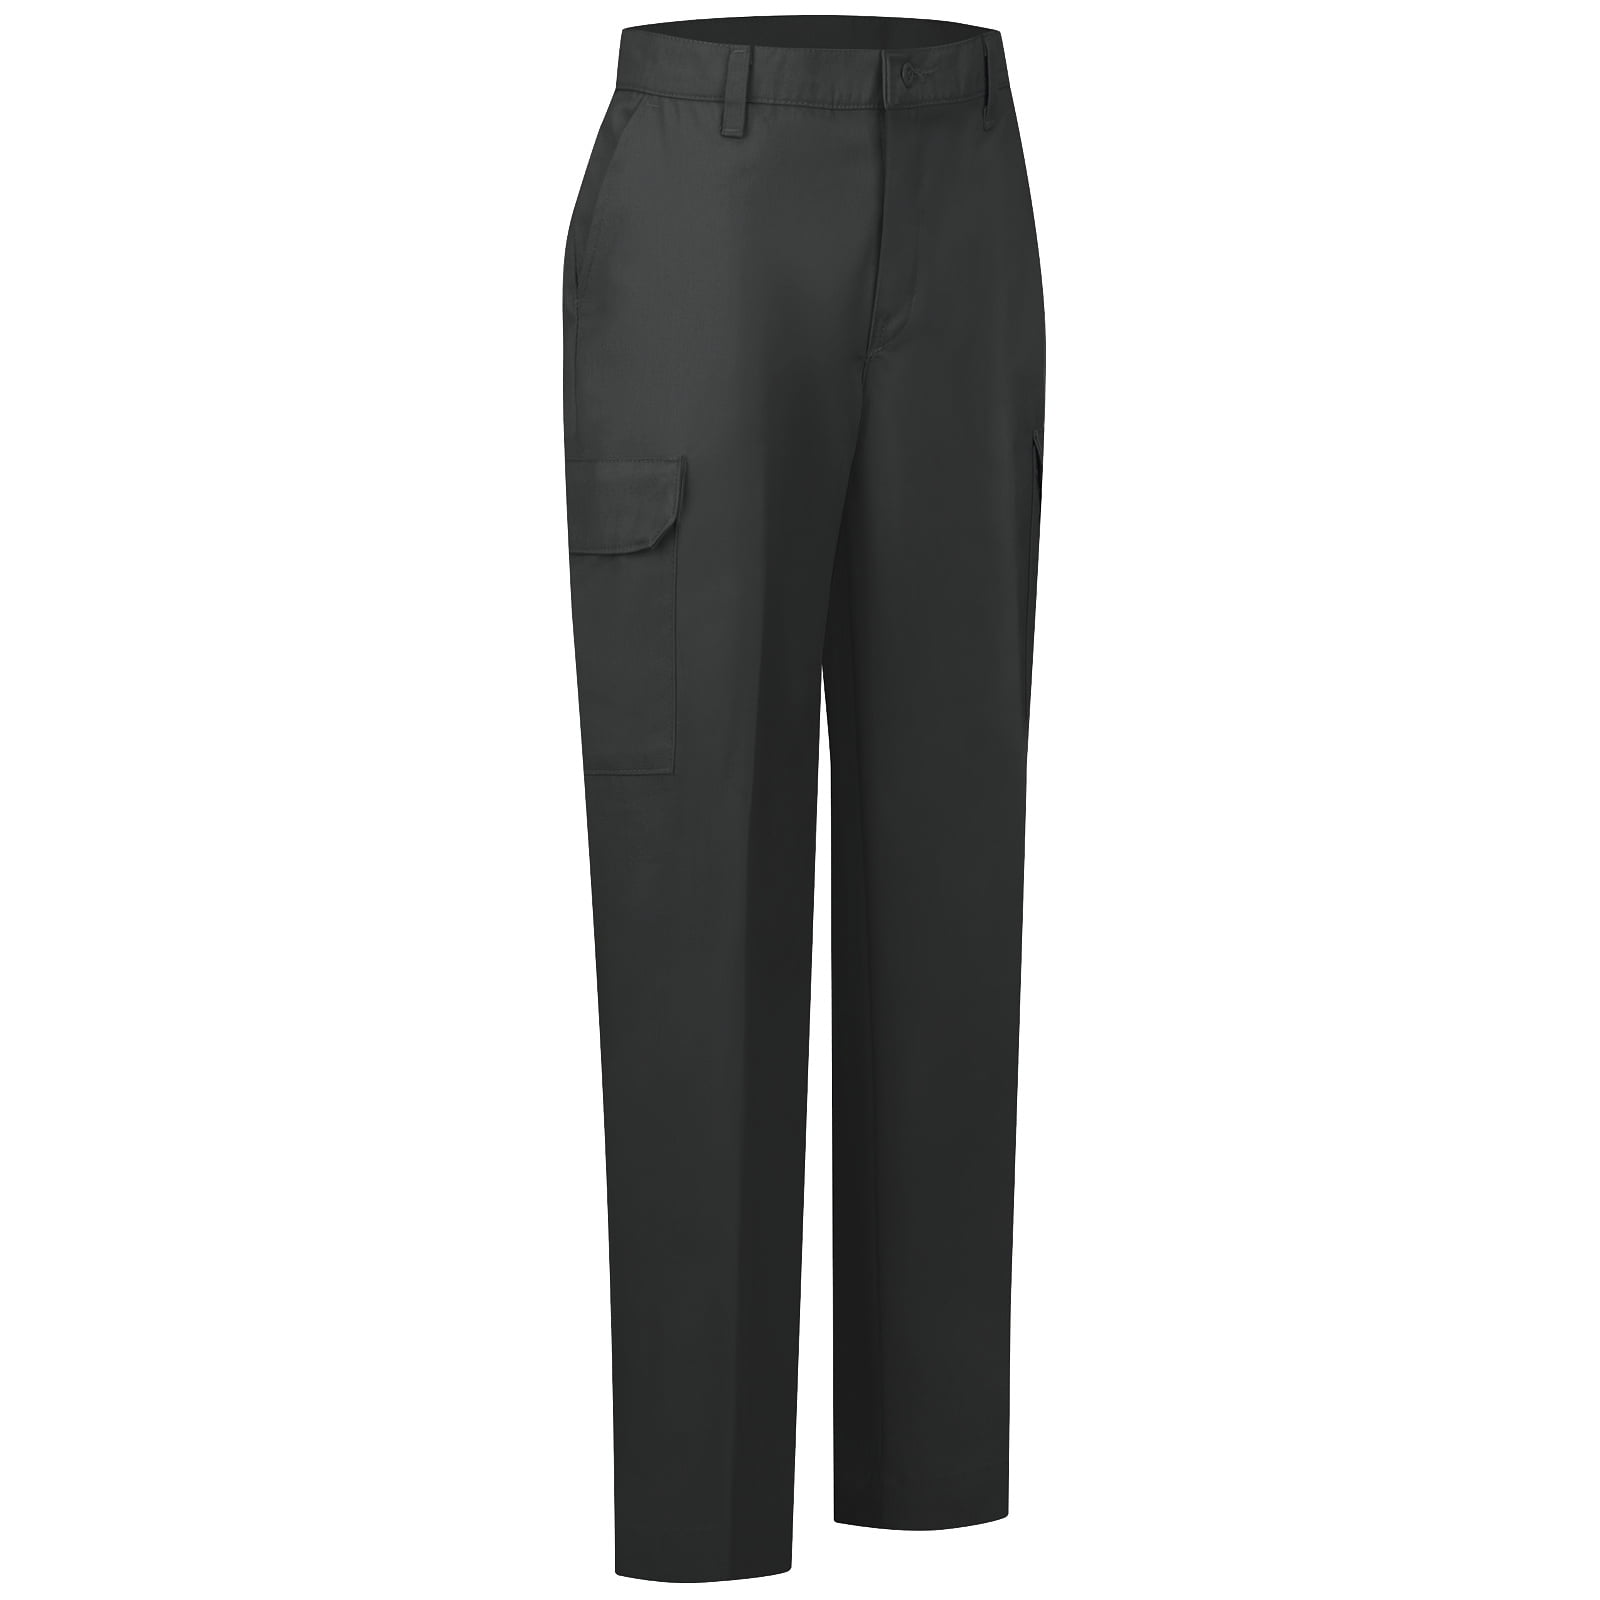  Carhartt womens Force Lightweight Legging (Plus Sizes) Work  Utility Pants, Black, X-Small Tall US: Clothing, Shoes & Jewelry